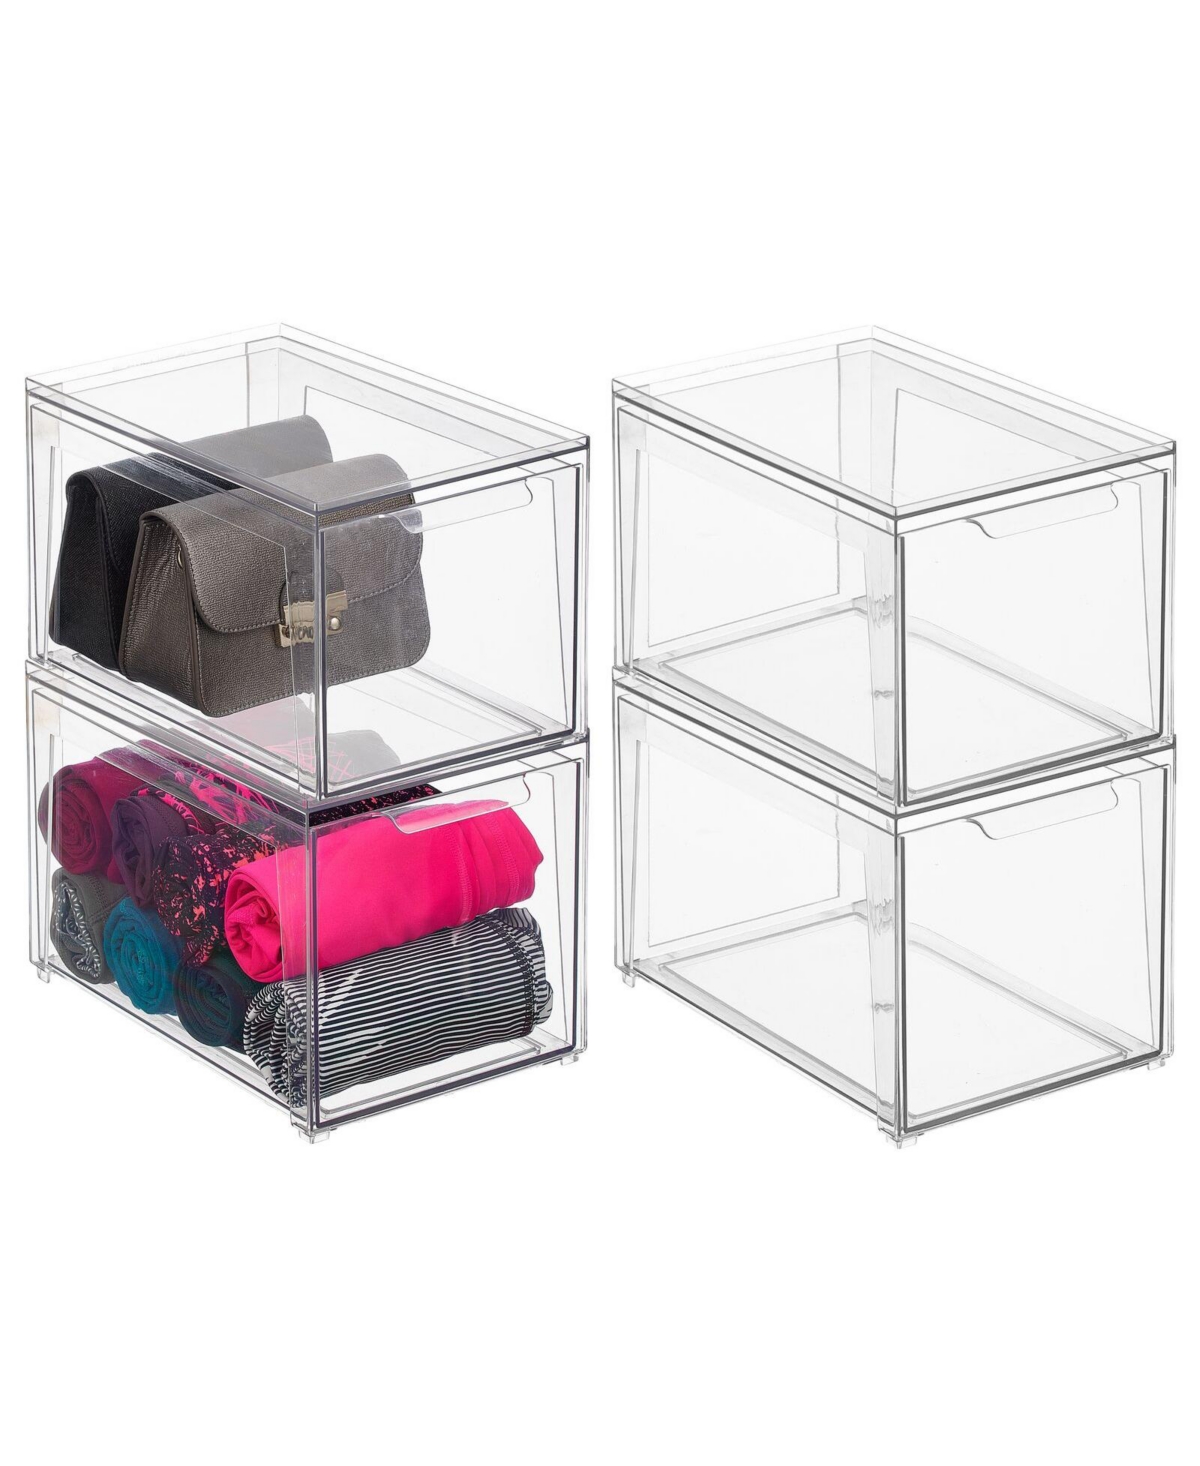 Stackable Closet Storage Bin Box with Pull-Out Drawer, Medium - 4 Pack - Clear